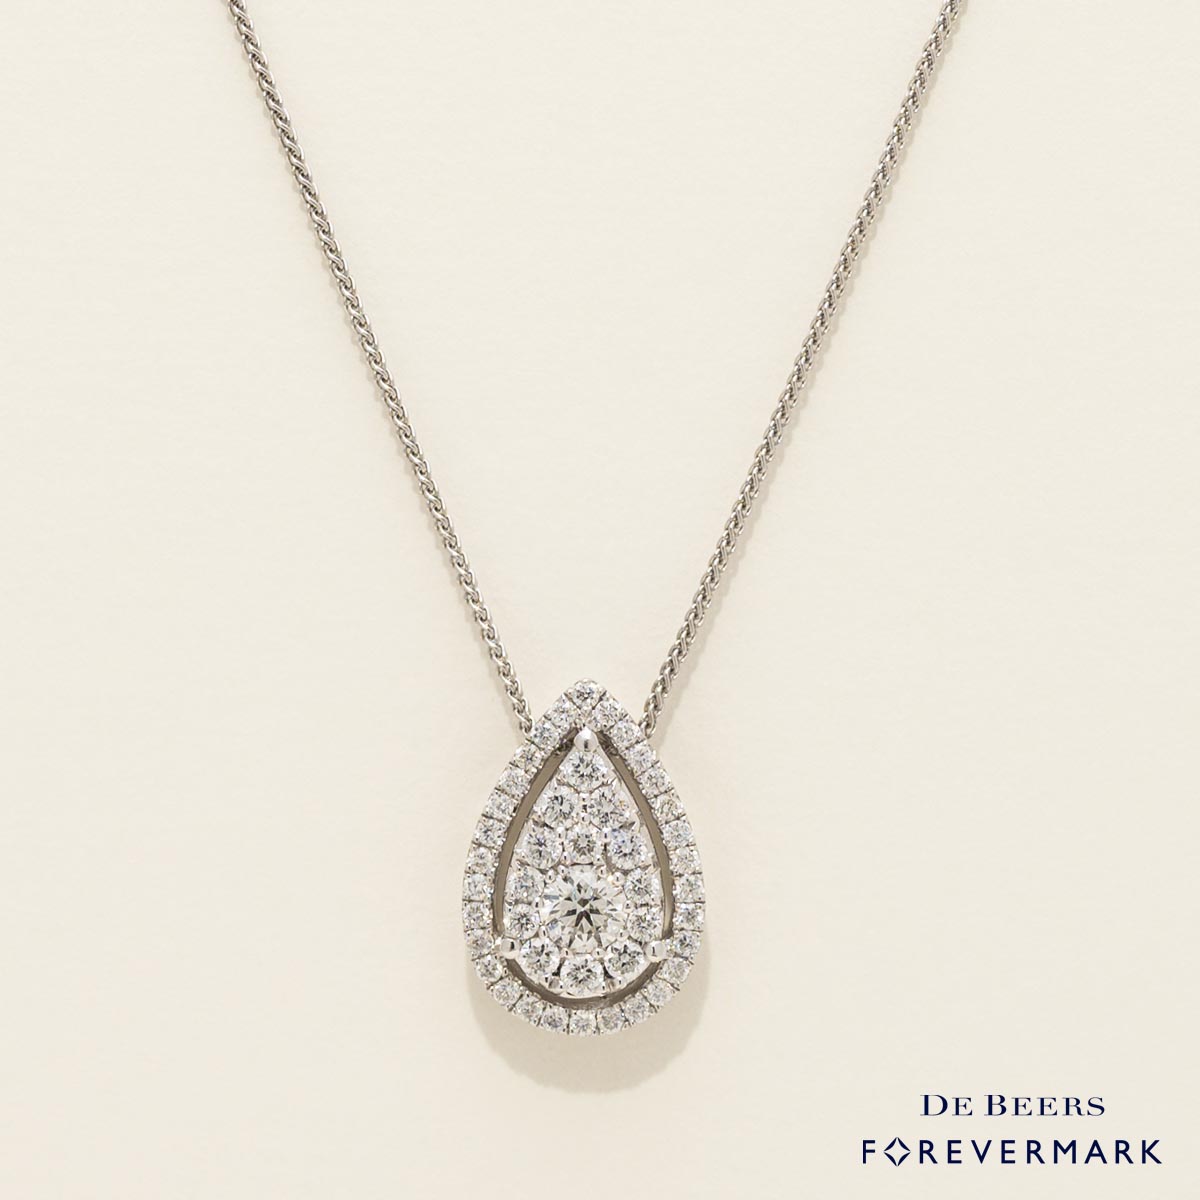 De Beers Forevermark Center of My Universe Pear Shaped Diamond Halo Necklace in 18kt White Gold (1/2ct tw)